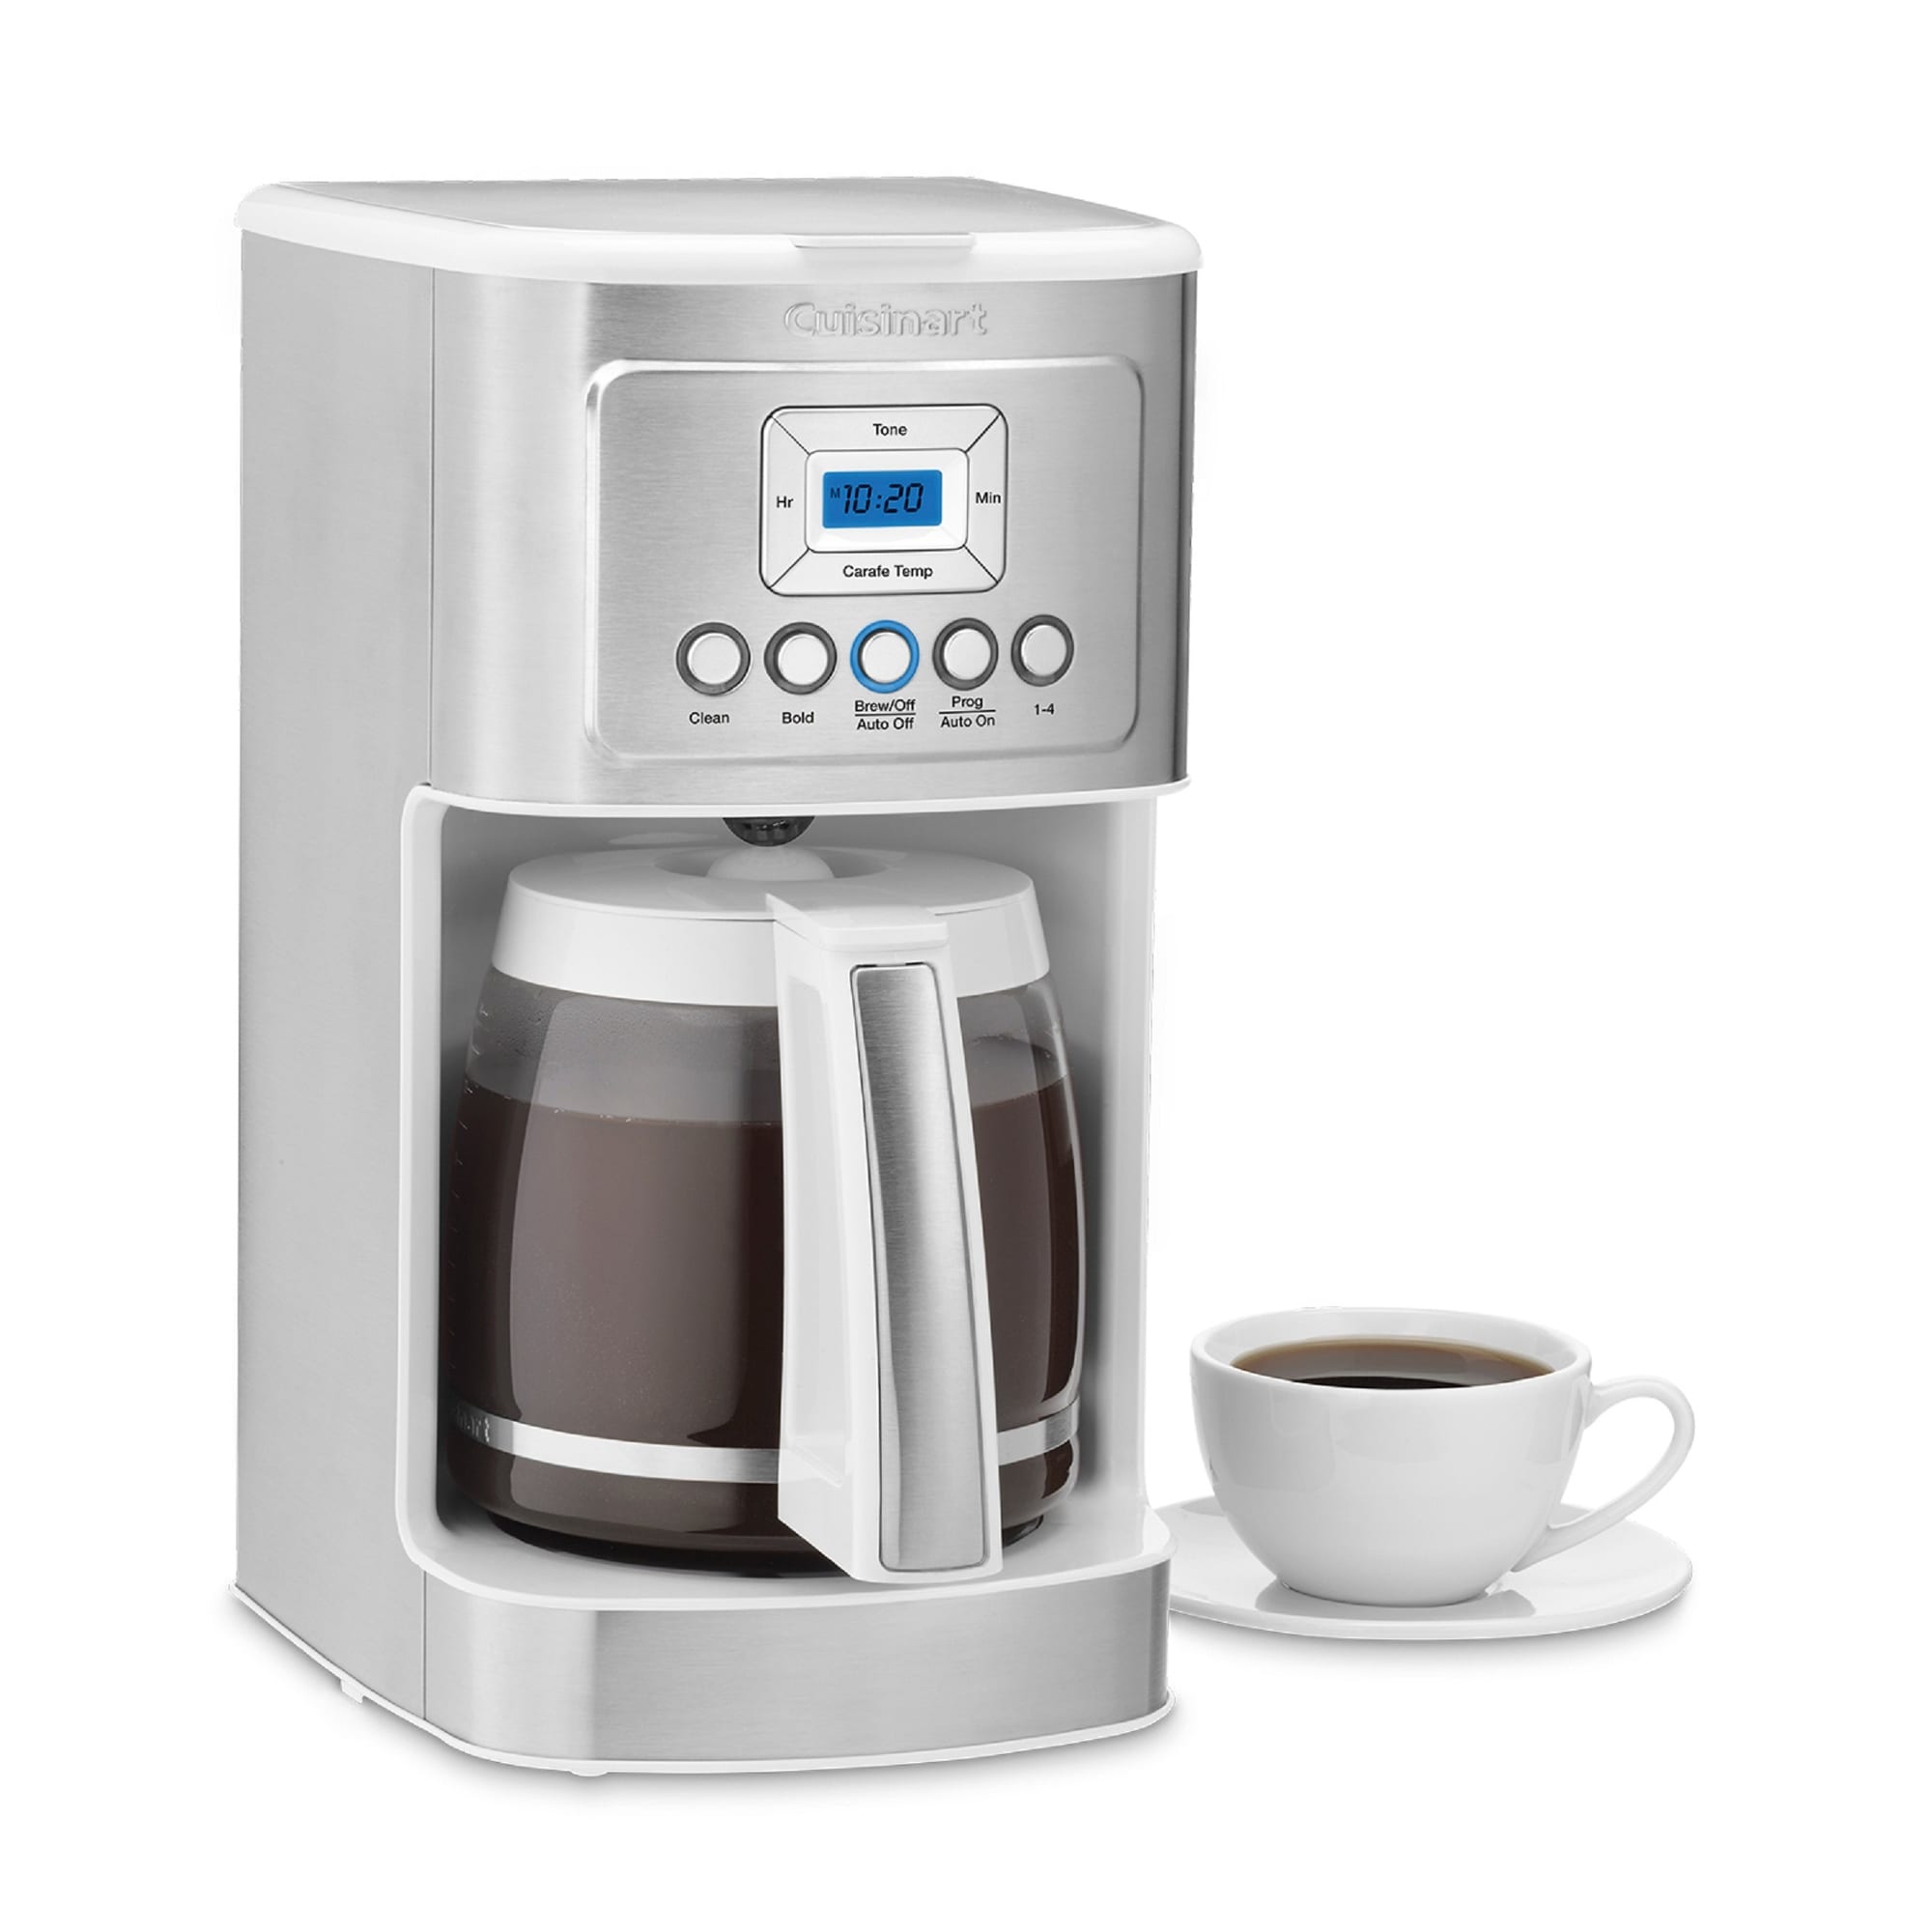 https://ak1.ostkcdn.com/images/products/is/images/direct/ad3c32af16a691741392340dd322cf265b1288d5/Cuisinart-PerfecTemp-14-Cup-Programmable-Coffeemaker-Bundle.jpg